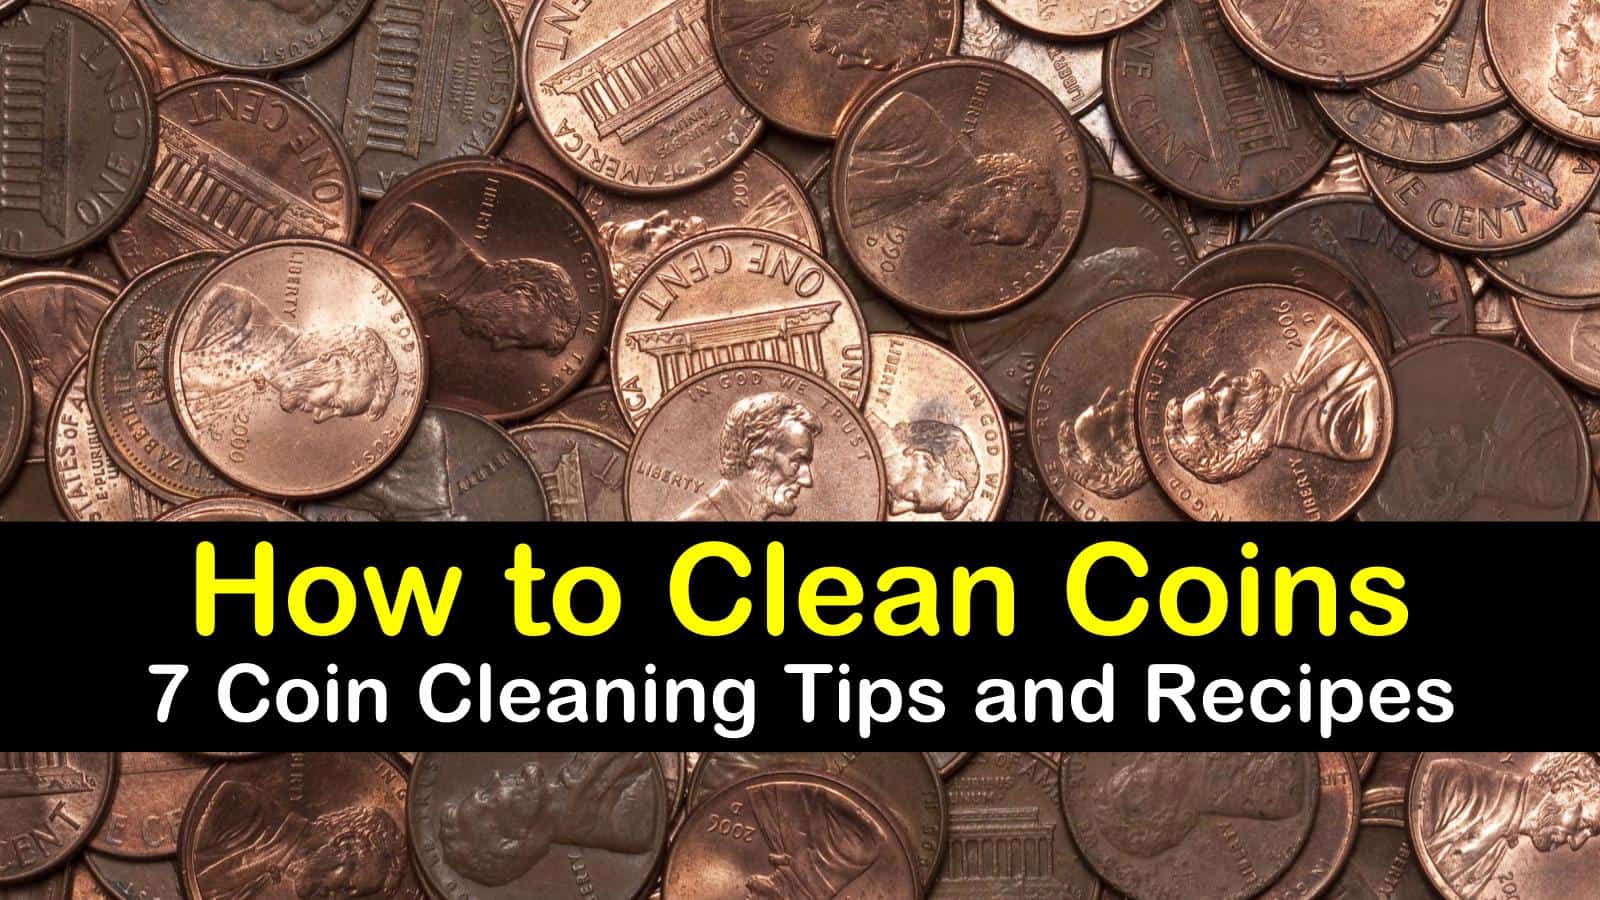 How To Clean Coins? Updated 2023 - NW Maids House Cleaning Service